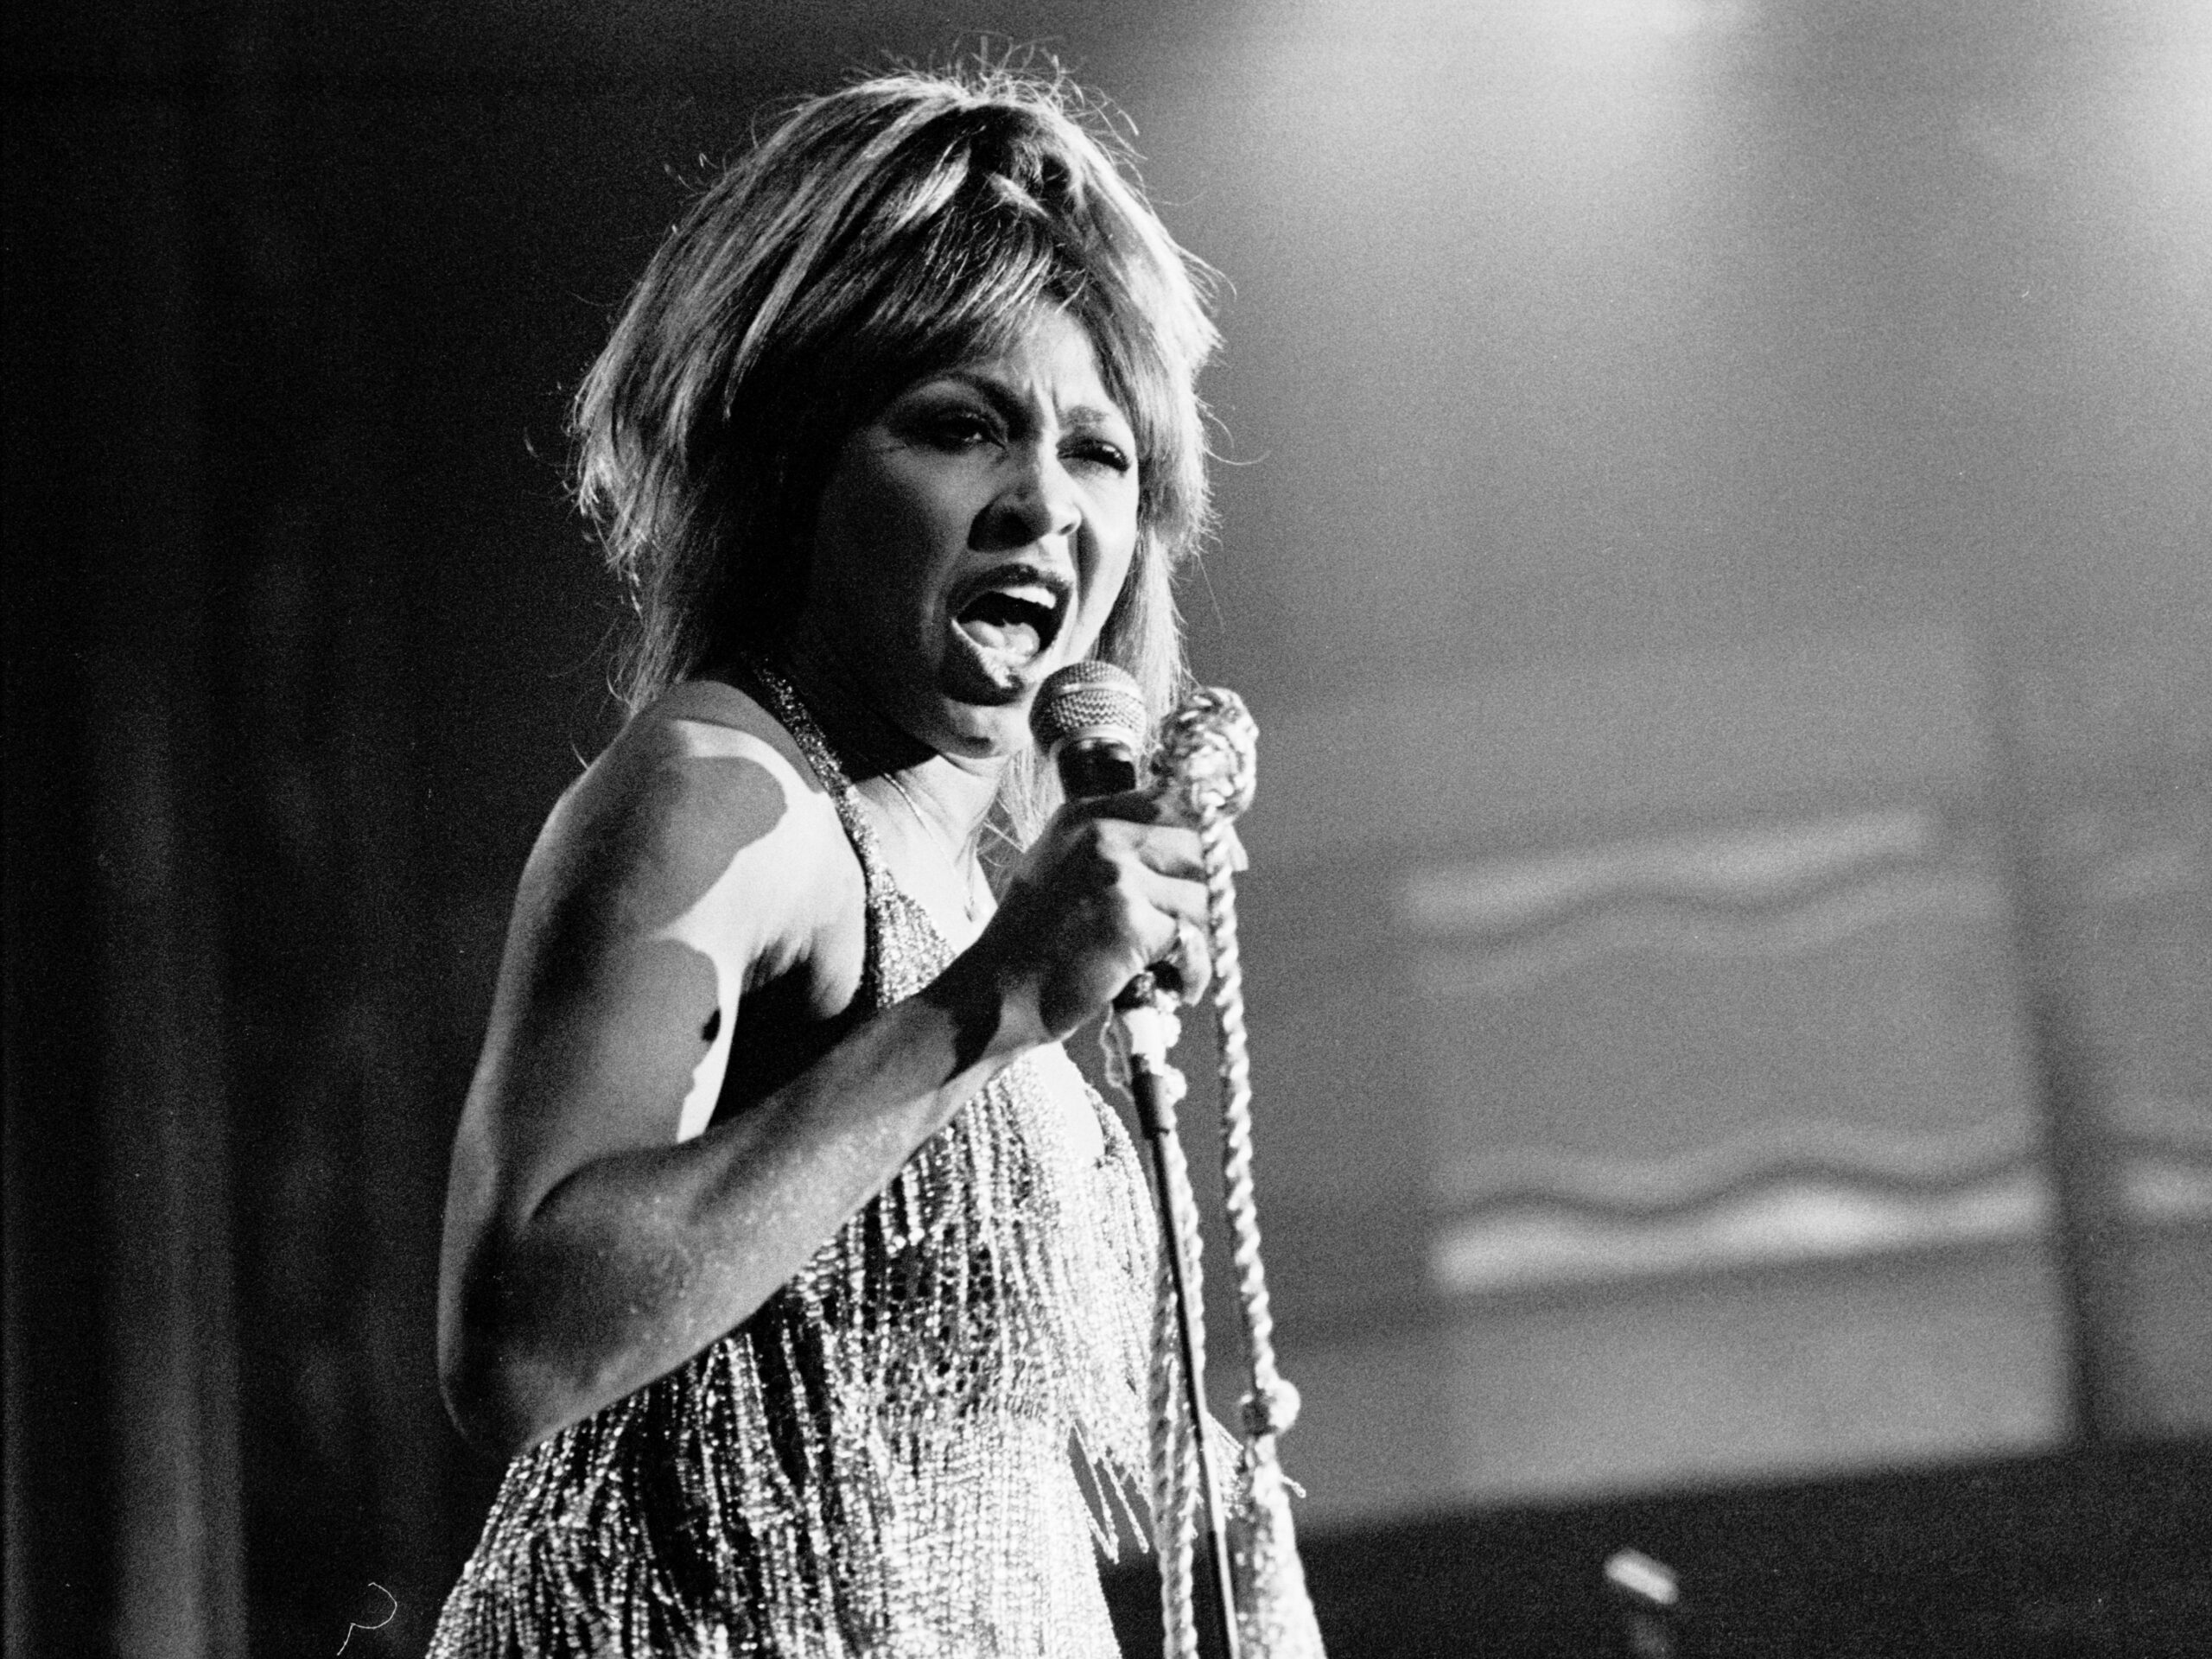 Tina Turner performs onstage at the Ritz, New York, New York, May 7, 1981. Turner was headlining a performance at the venue.